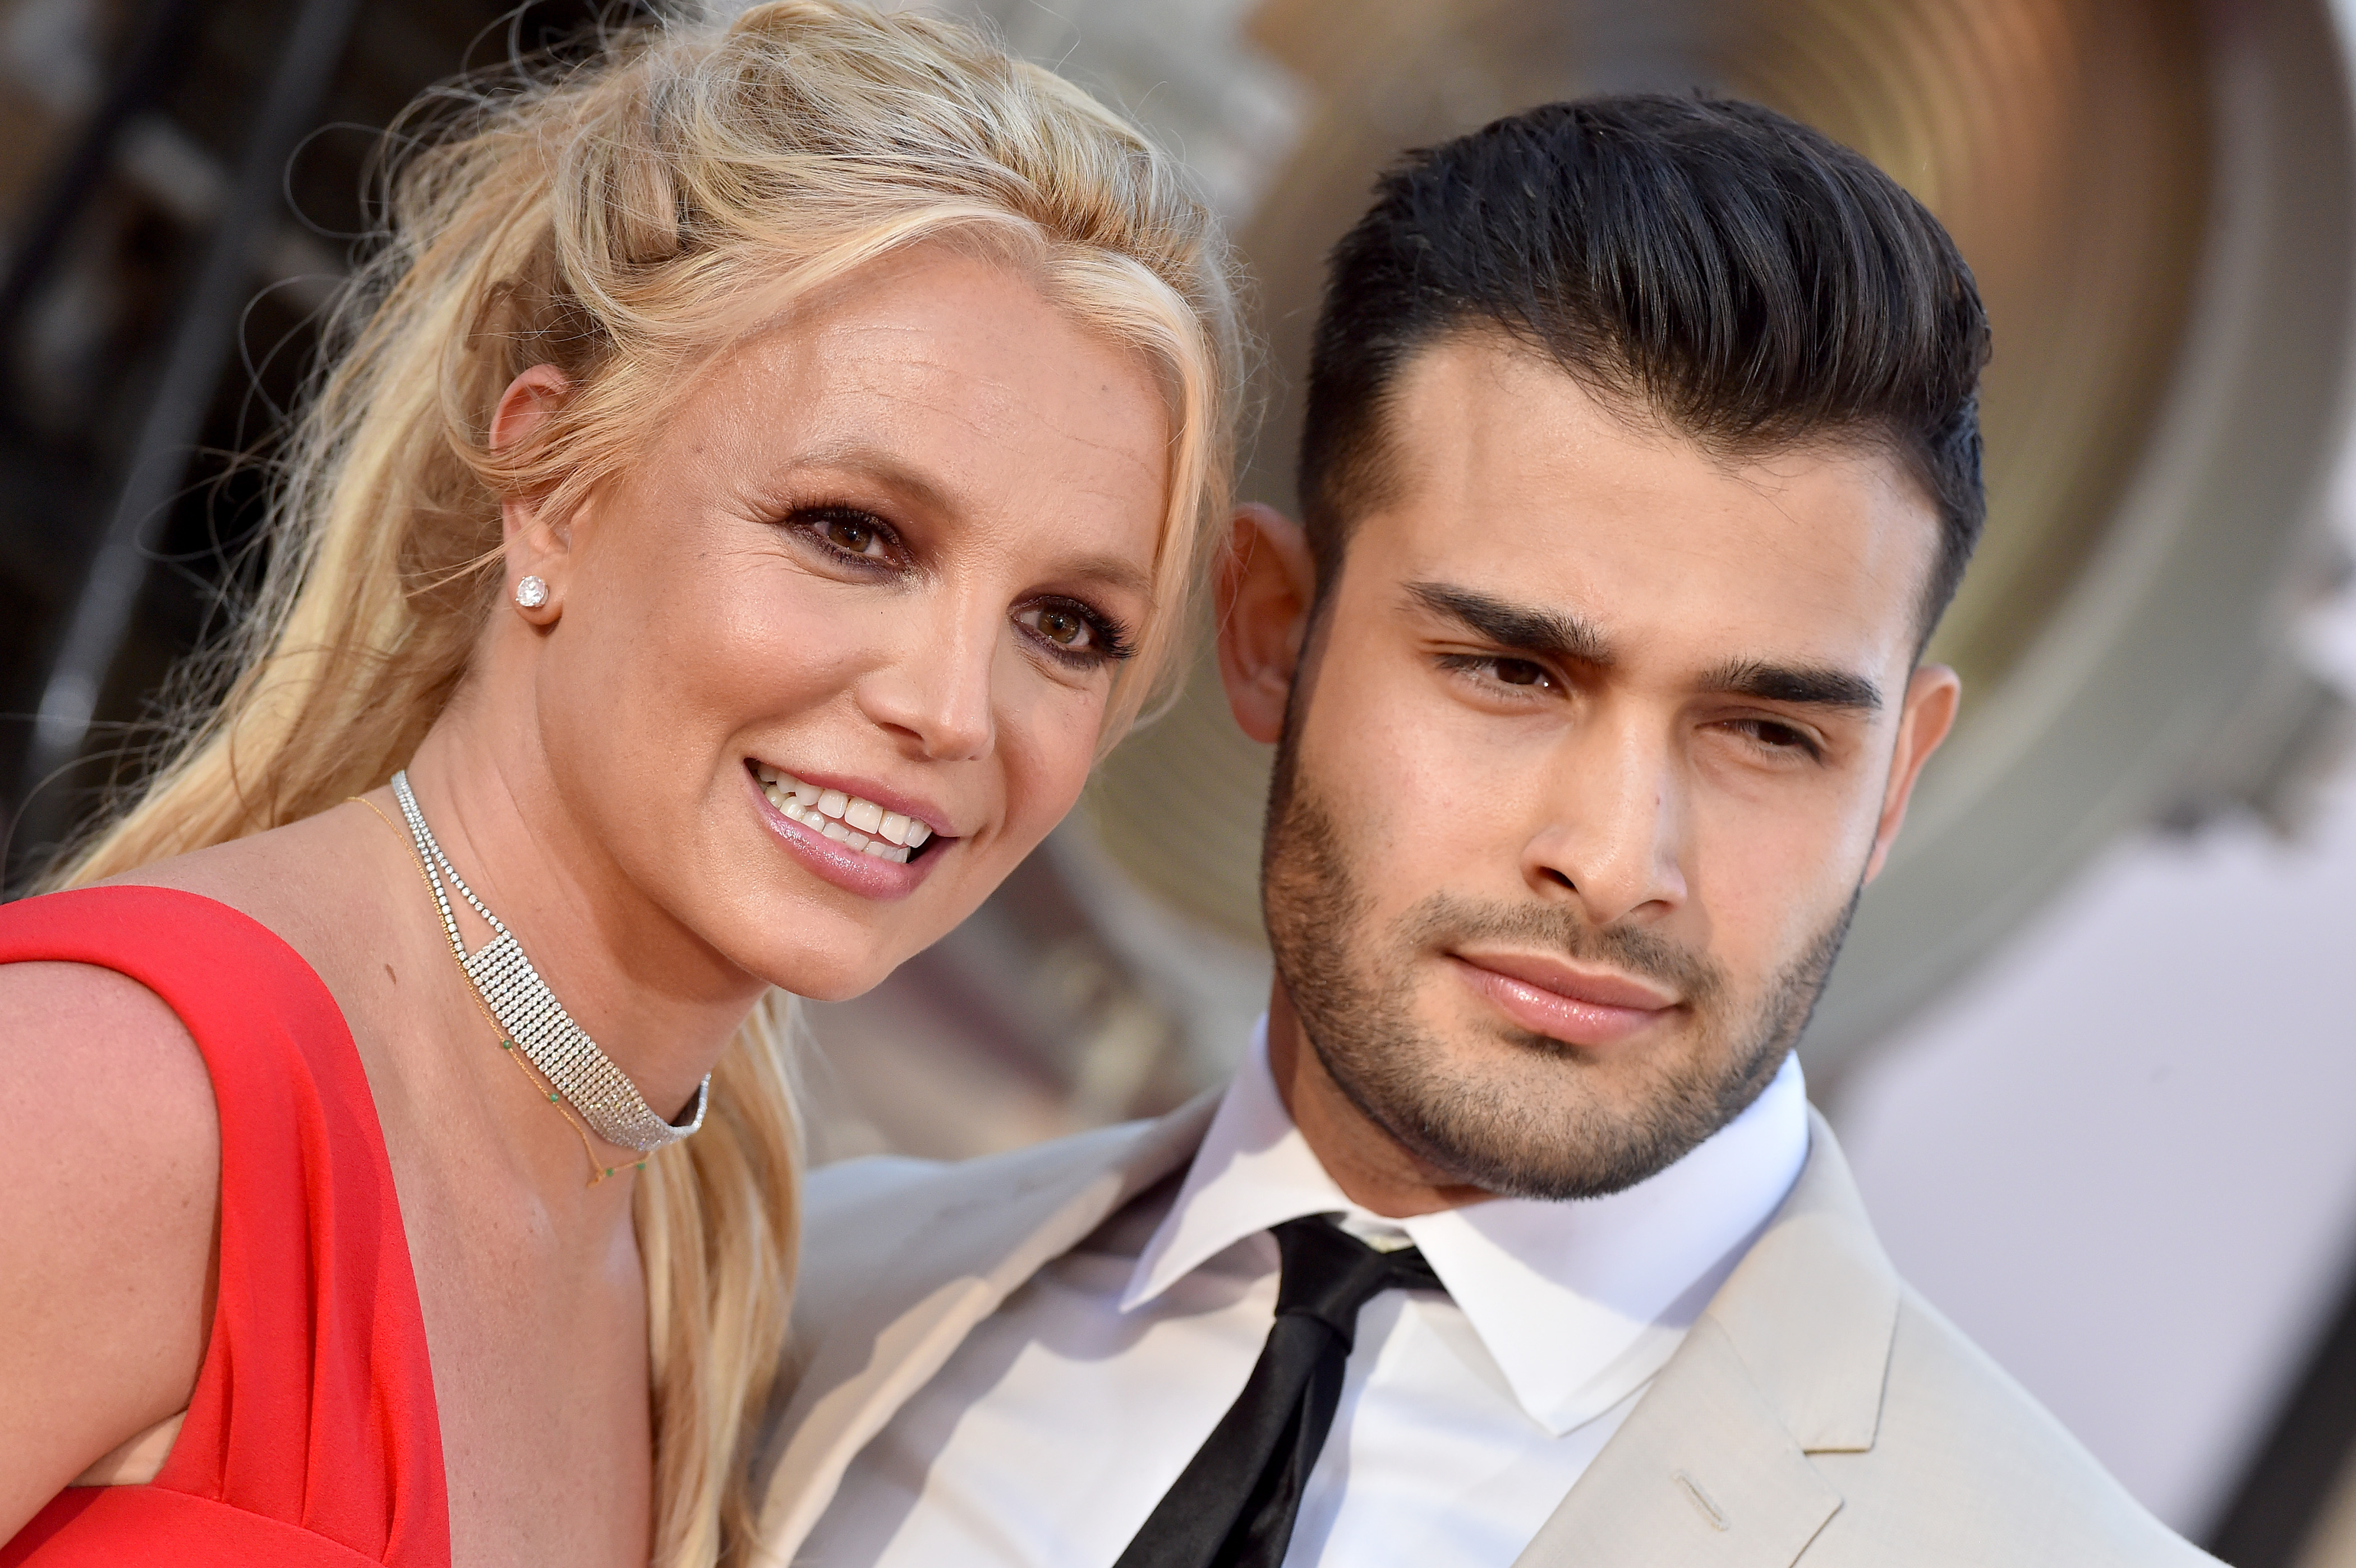 Britney Spears and Sam Asghari at "Once Upon a Time ... in Hollywood" Los Angeles premiere on July 22, 2019, in Hollywood, California | Source: Getty Images